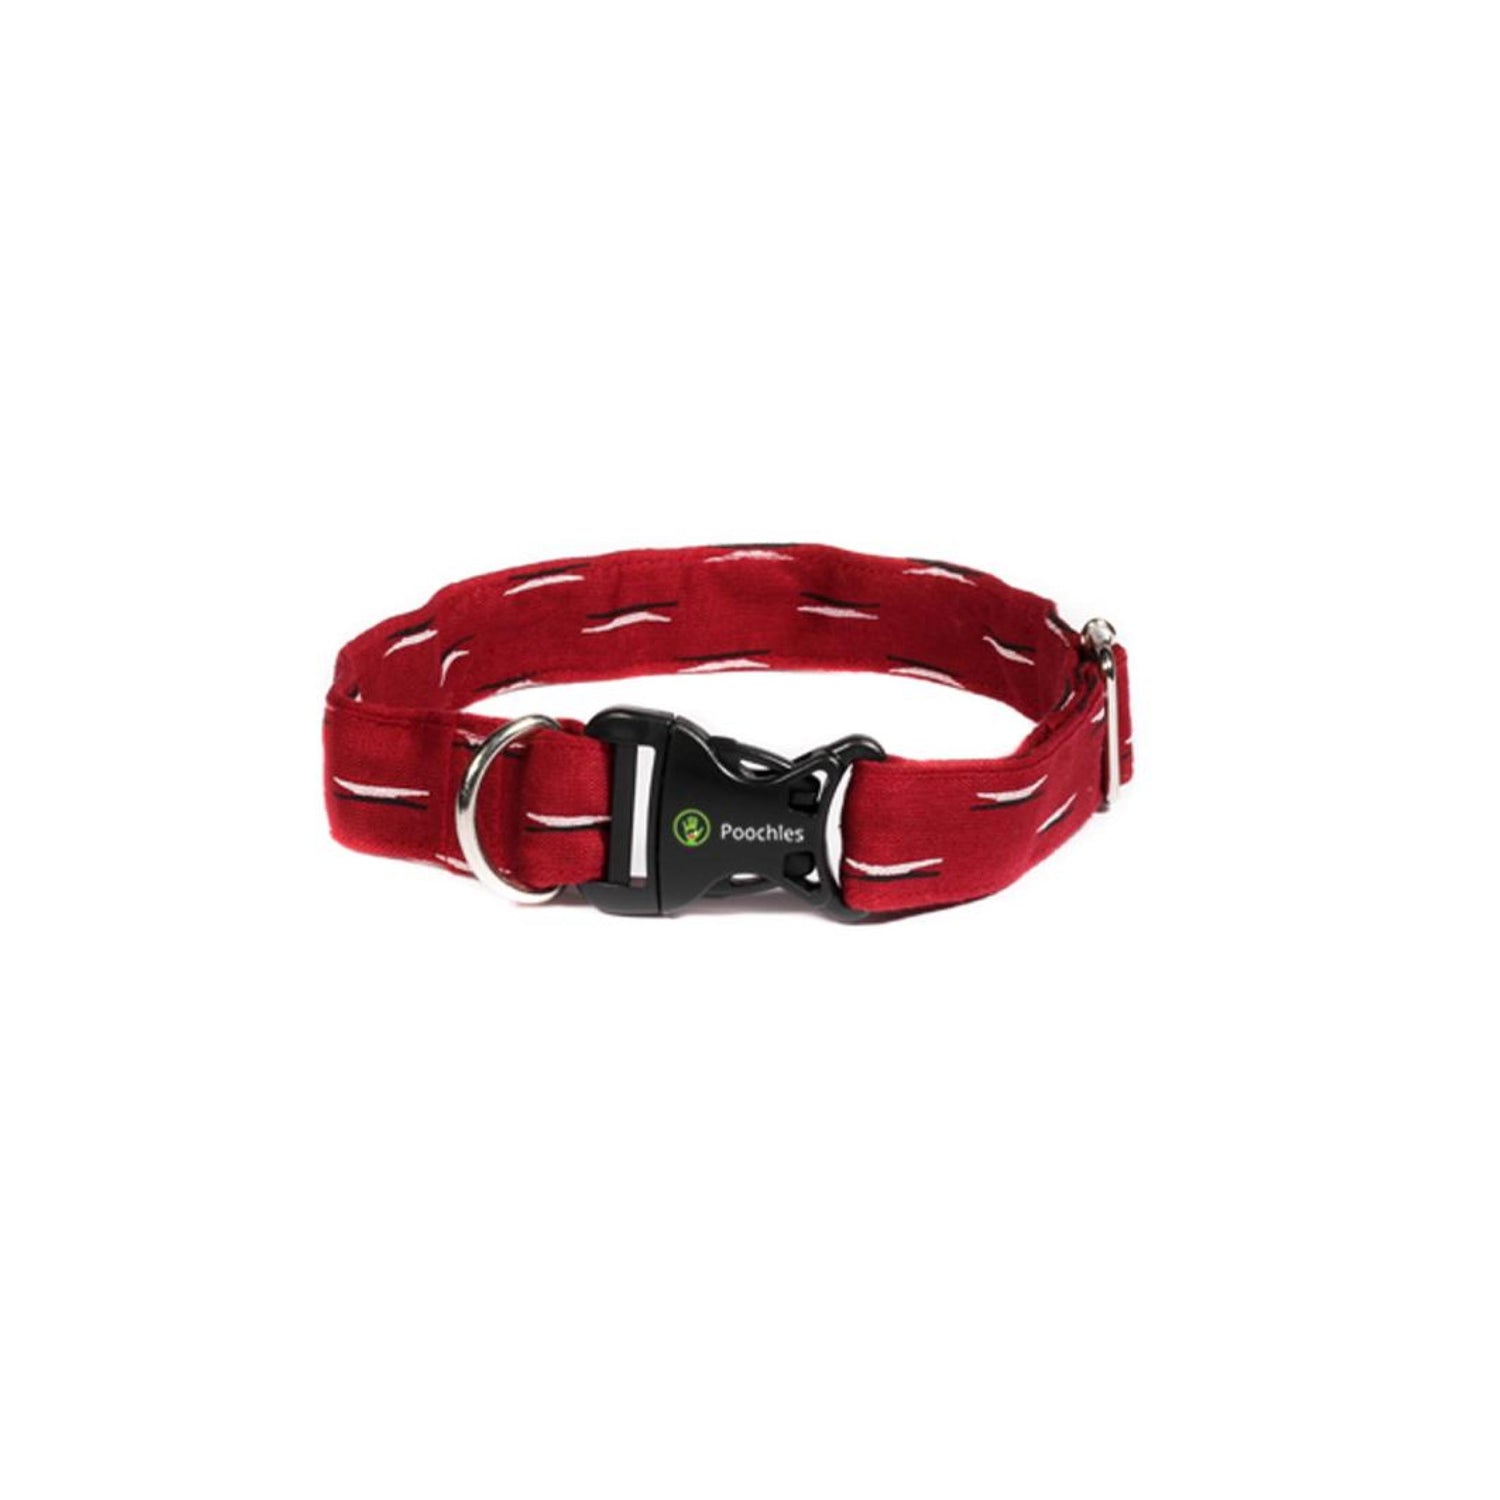 Poochles Red Adjustable Dog Collar With Trendy Design